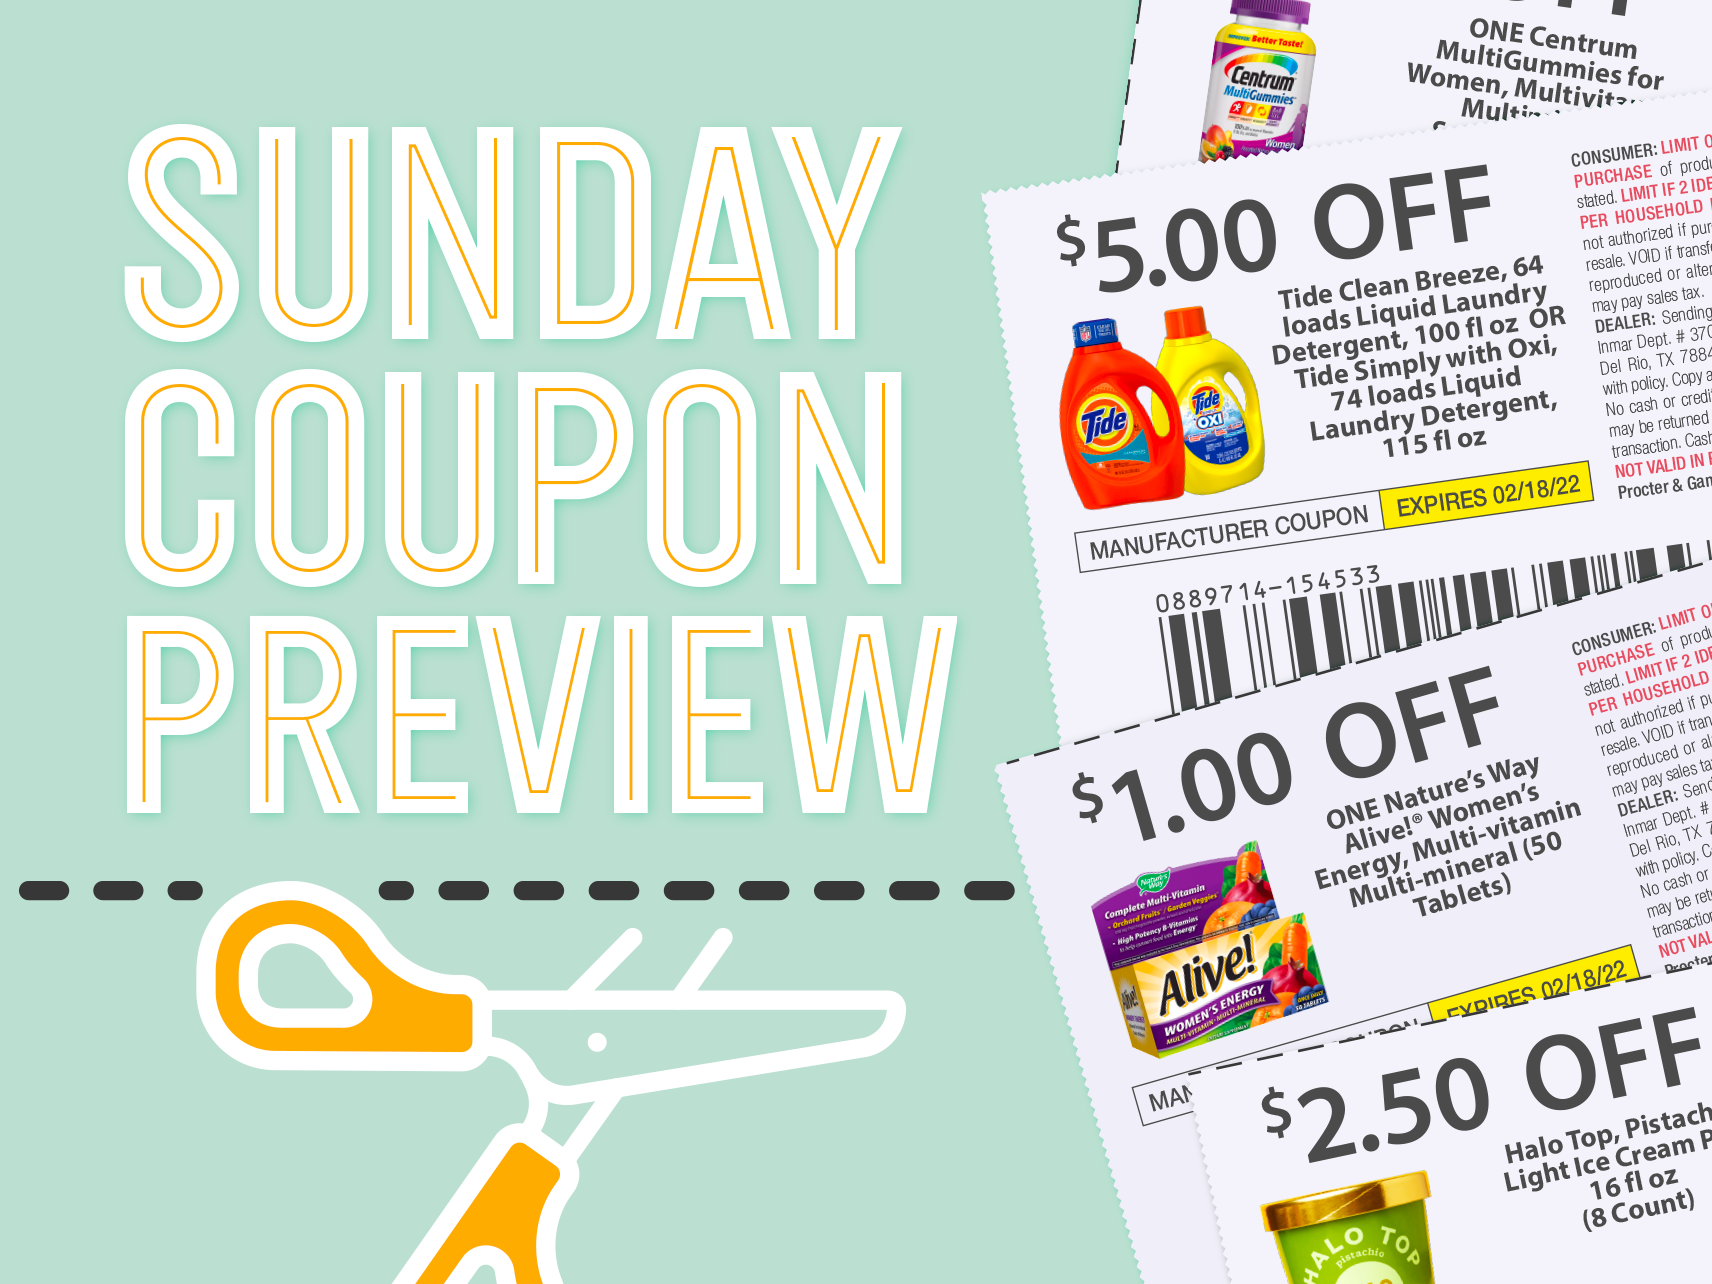 Sunday Coupon Preview For 4/16 – Two Inserts